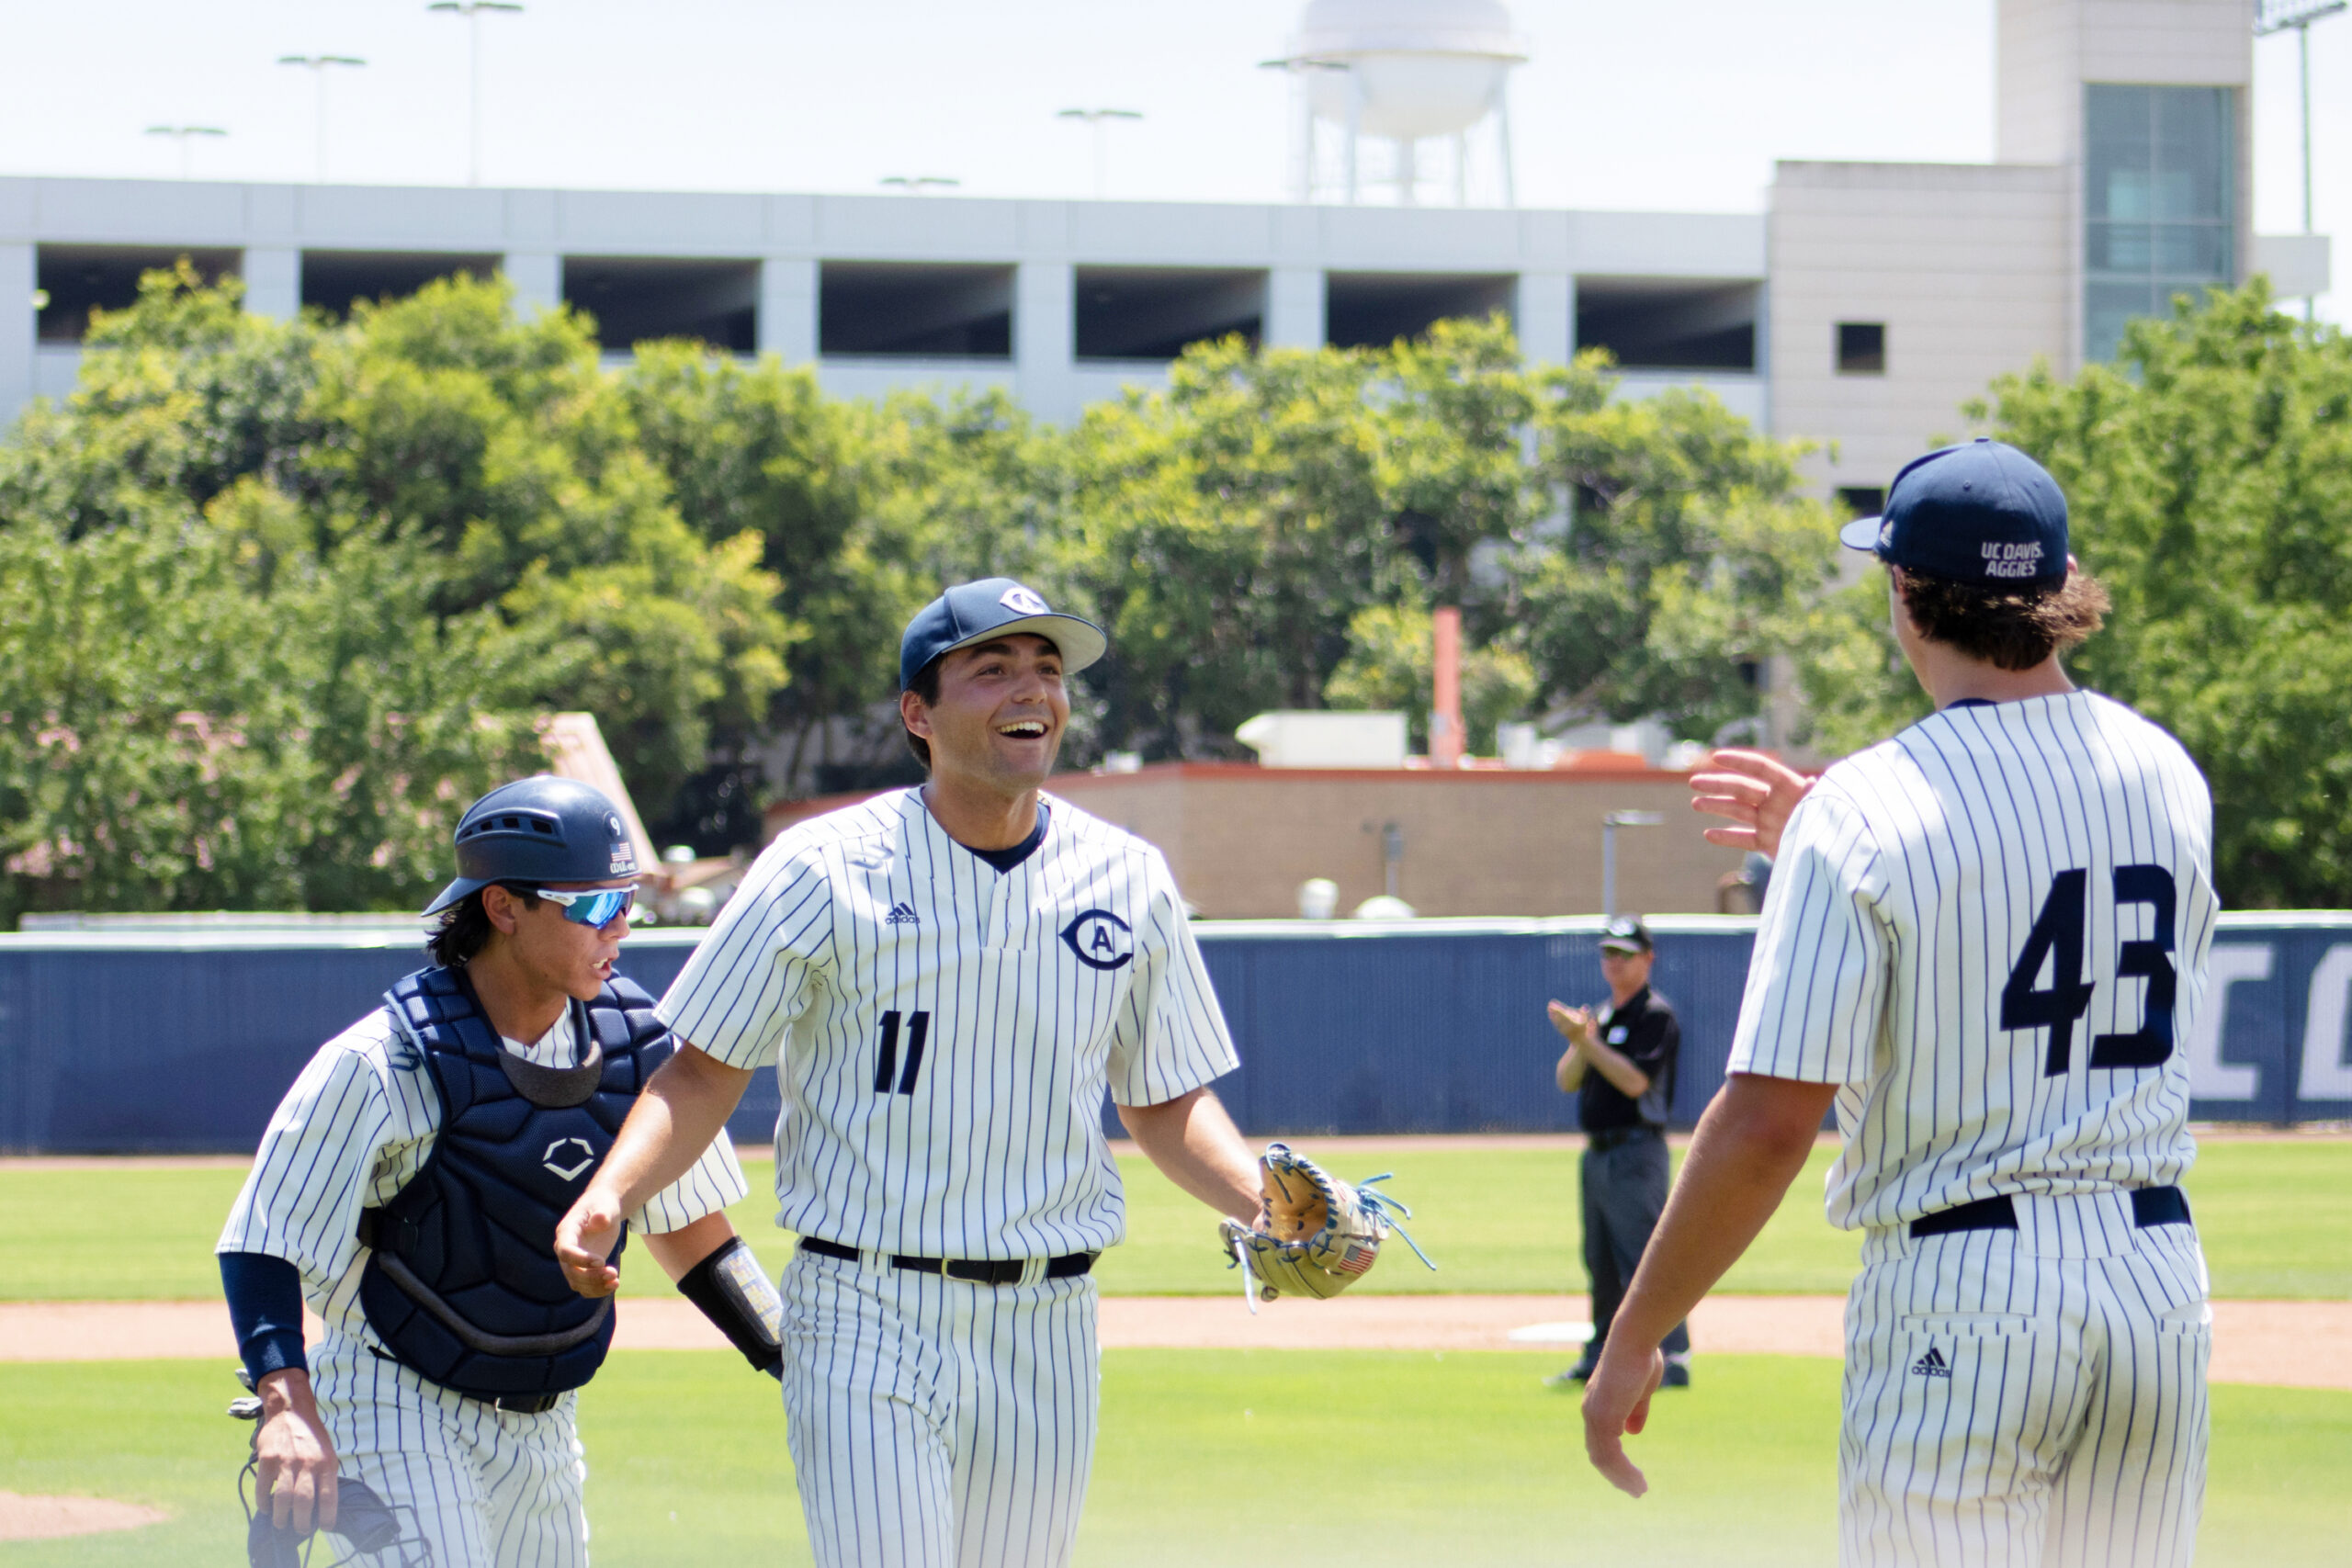 Aggies honor seniors in final home game against UC Irvine Anteaters